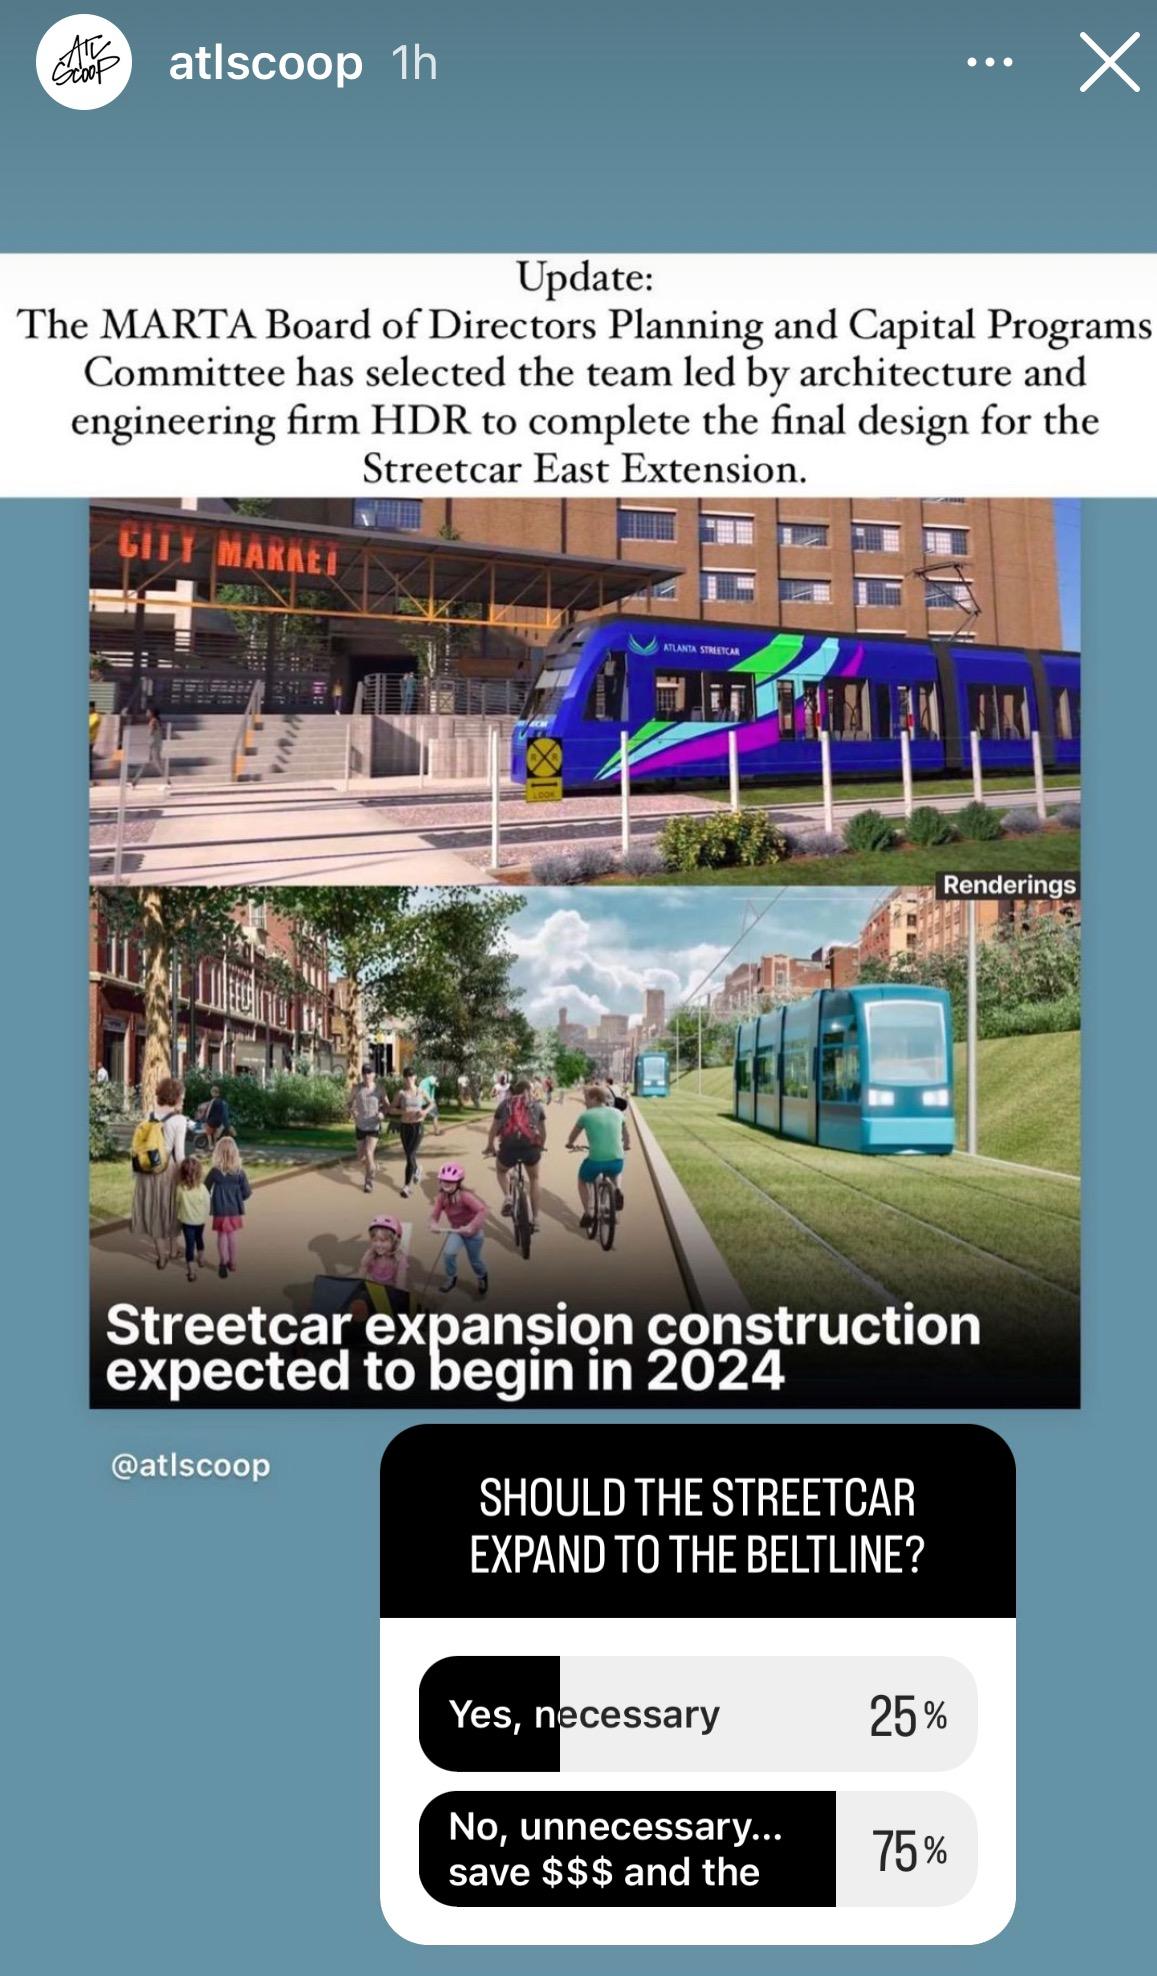 ATLscoop poll is against the streetcar